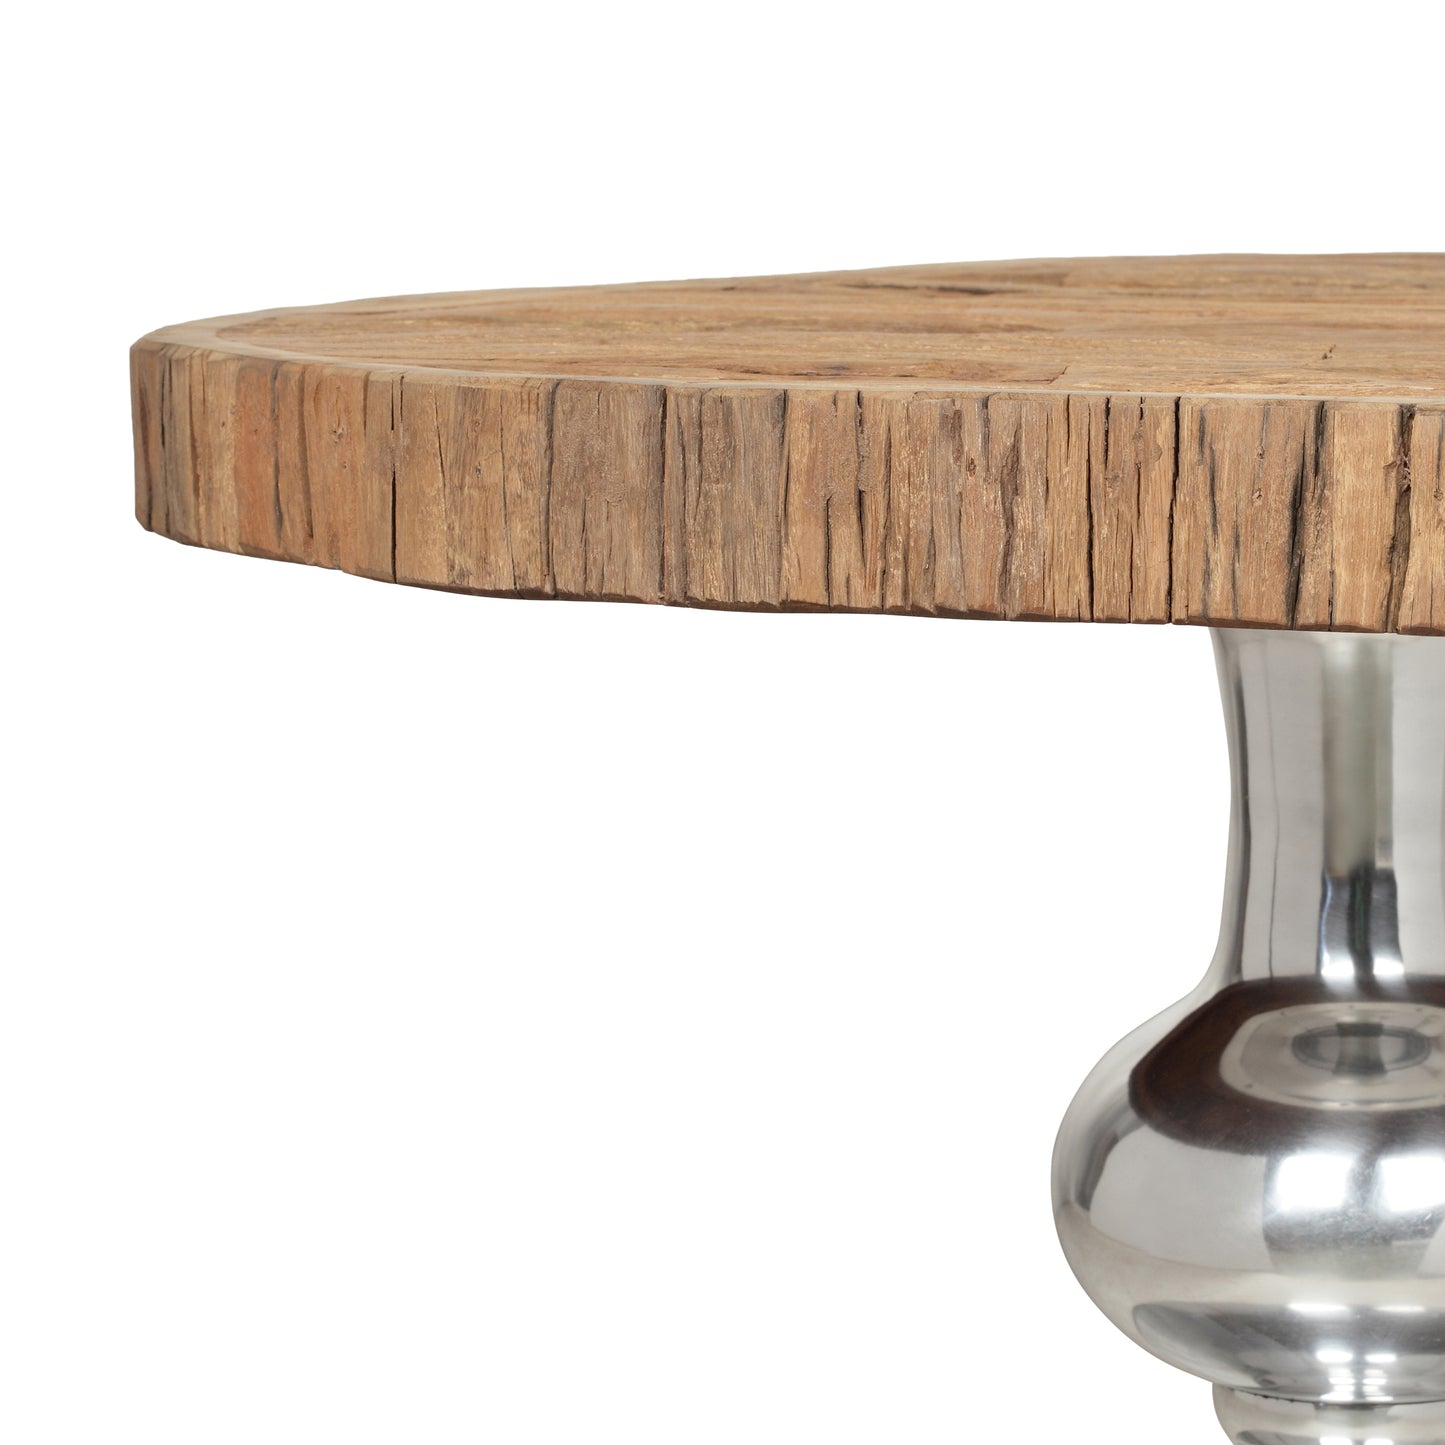 Oxton Handcrafted Rustic Glam Coffee Table with Raw Wood Tabletop